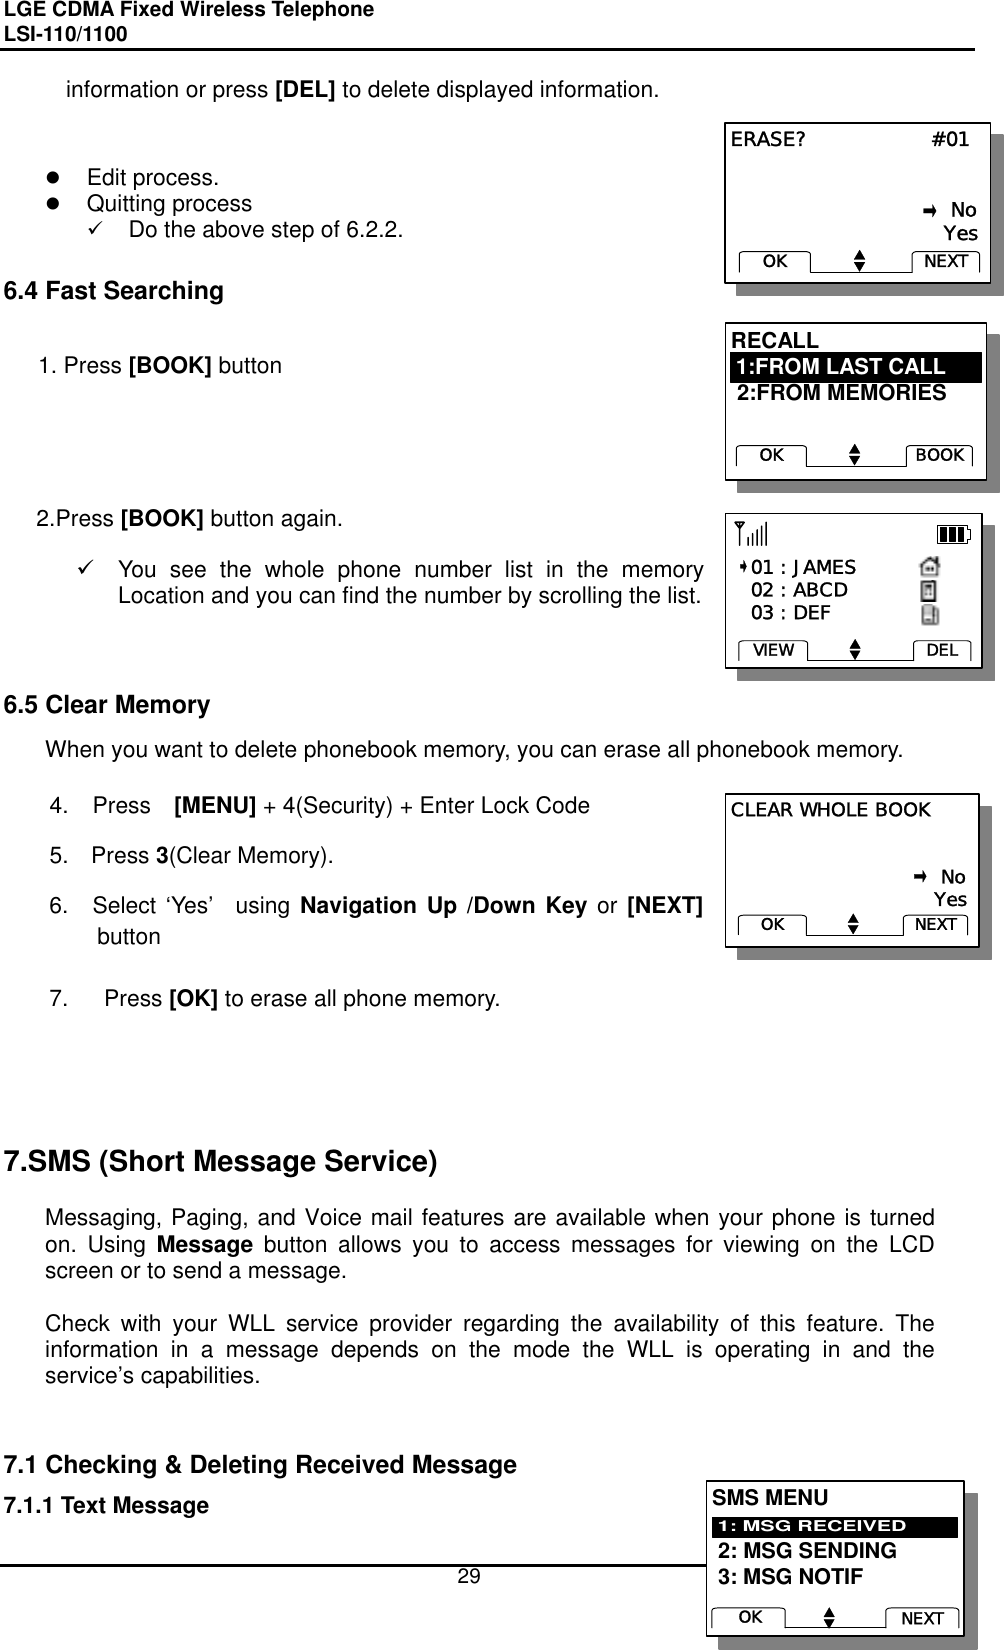 LGE CDMA Fixed Wireless Telephone                                       LSI-110/1100     29 RECALL  2:FROM MEMORIESBOOKOK1:FROM LAST CALLRECALL  2:FROM MEMORIESBOOKOK1:FROM LAST CALLCLEAR WHOLE BOOK                                                            No                               YesNEXTOKCLEAR WHOLE BOOK                                                            No                               YesNEXTOKERASE?                  #01                                                            No                               YesNEXTOKERASE?                  #01                                                            No                               YesNEXTOKinformation or press [DEL] to delete displayed information.          Edit process.   Quitting process   Do the above step of 6.2.2.  6.4 Fast Searching    1. Press [BOOK] button      2.Press [BOOK] button again.    You see the whole phone number list in the memory Location and you can find the number by scrolling the list.        6.5 Clear Memory When you want to delete phonebook memory, you can erase all phonebook memory.  4. Press  [MENU] + 4(Security) + Enter Lock Code 5. Press 3(Clear Memory). 6.  Select ‘Yes’  using Navigation Up /Down Key or [NEXT] button  7.  Press [OK] to erase all phone memory.      7.SMS (Short Message Service)  Messaging, Paging, and Voice mail features are available when your phone is turned on. Using Message button allows you to access messages for viewing on the LCD screen or to send a message.    Check with your WLL service provider regarding the availability of this feature. The information in a message depends on the mode the WLL is operating in and the service’s capabilities.   7.1 Checking &amp; Deleting Received Message 7.1.1 Text Message    01 : JAMES   02 : ABCD   03 : DEFDELVIEW   01 : JAMES   02 : ABCD   03 : DEFDELVIEWSMS MENU 2: MSG SENDING 3: MSG NOTIF1: MSG RECEIVEDNEXTOKSMS MENU 2: MSG SENDING 3: MSG NOTIF1: MSG RECEIVEDNEXTOK